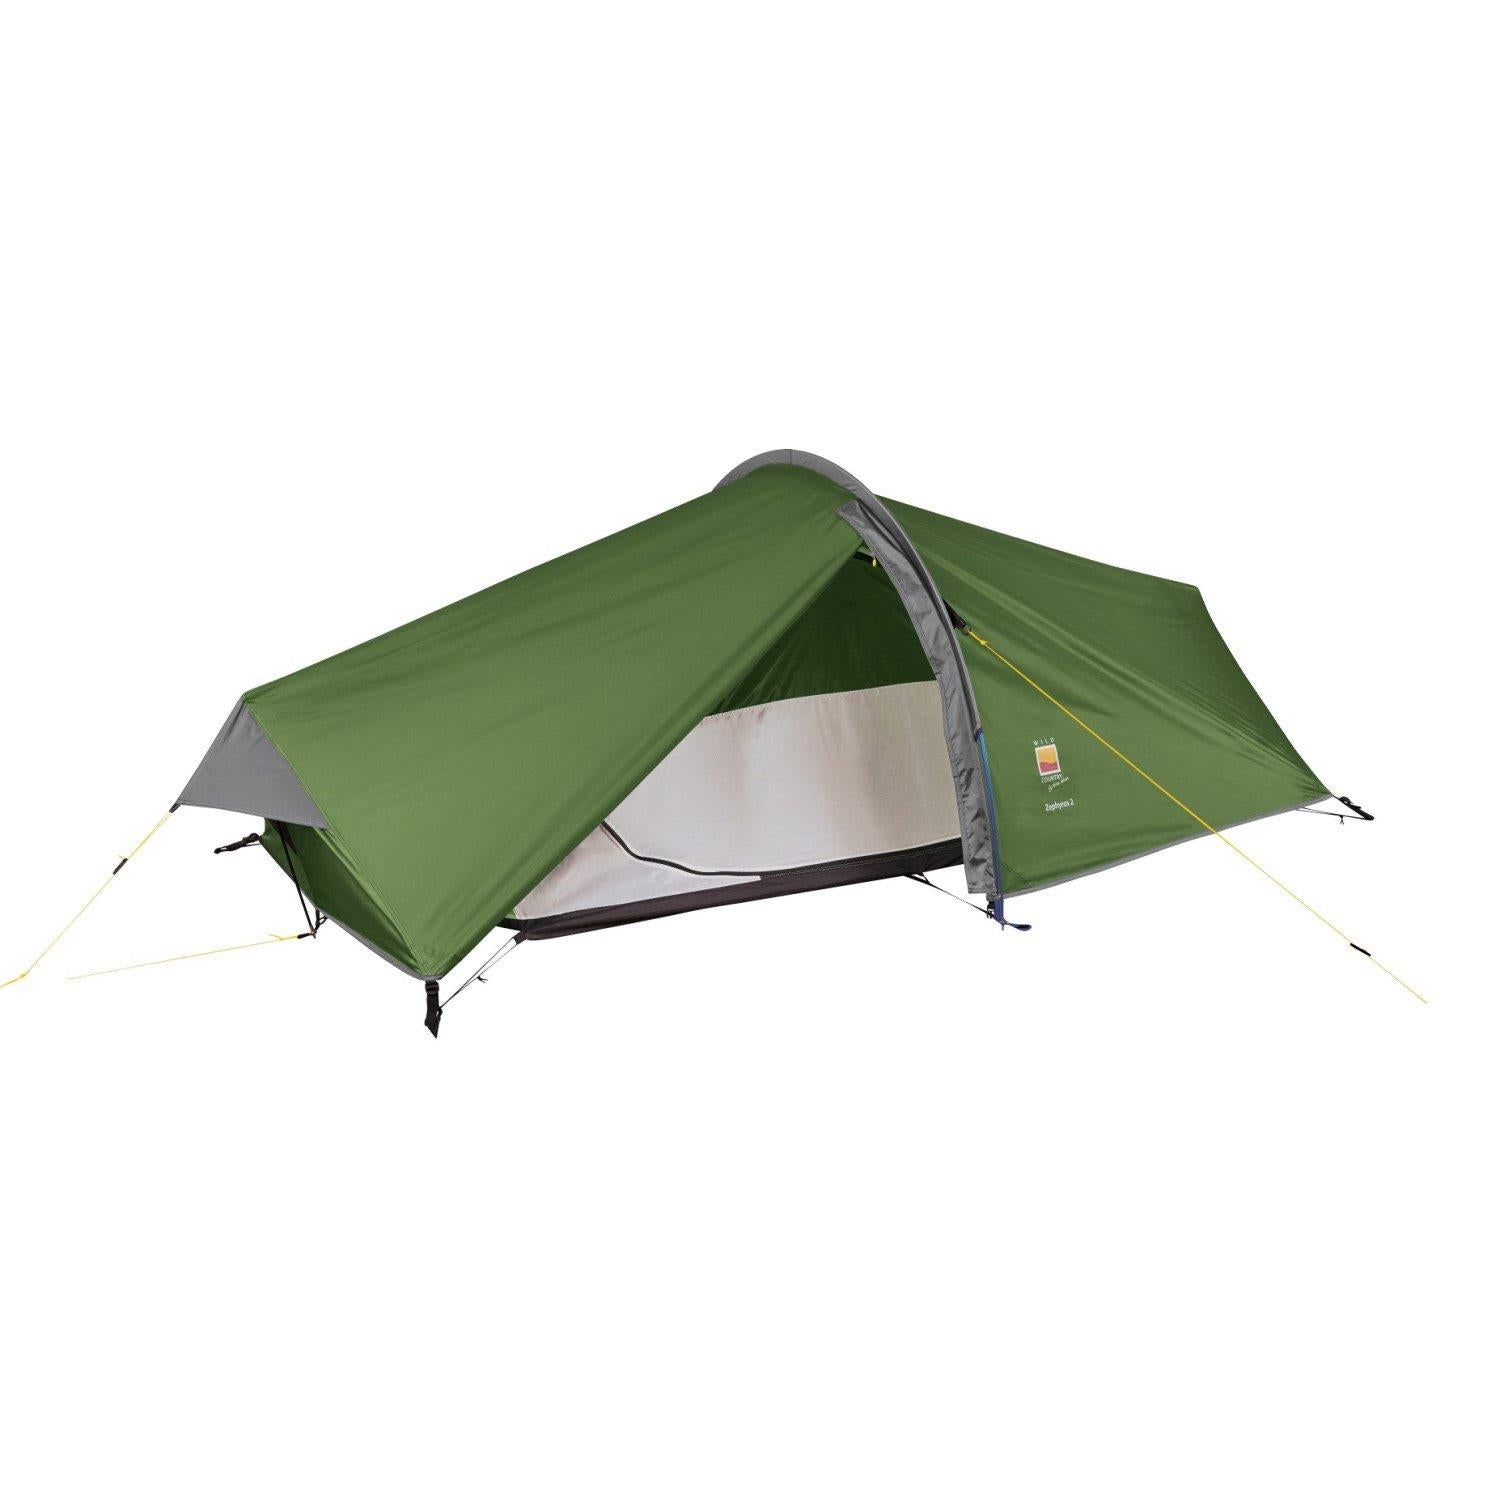 Wild Country Zephyros Compact 2 V3 Tent - 2 Man Tent